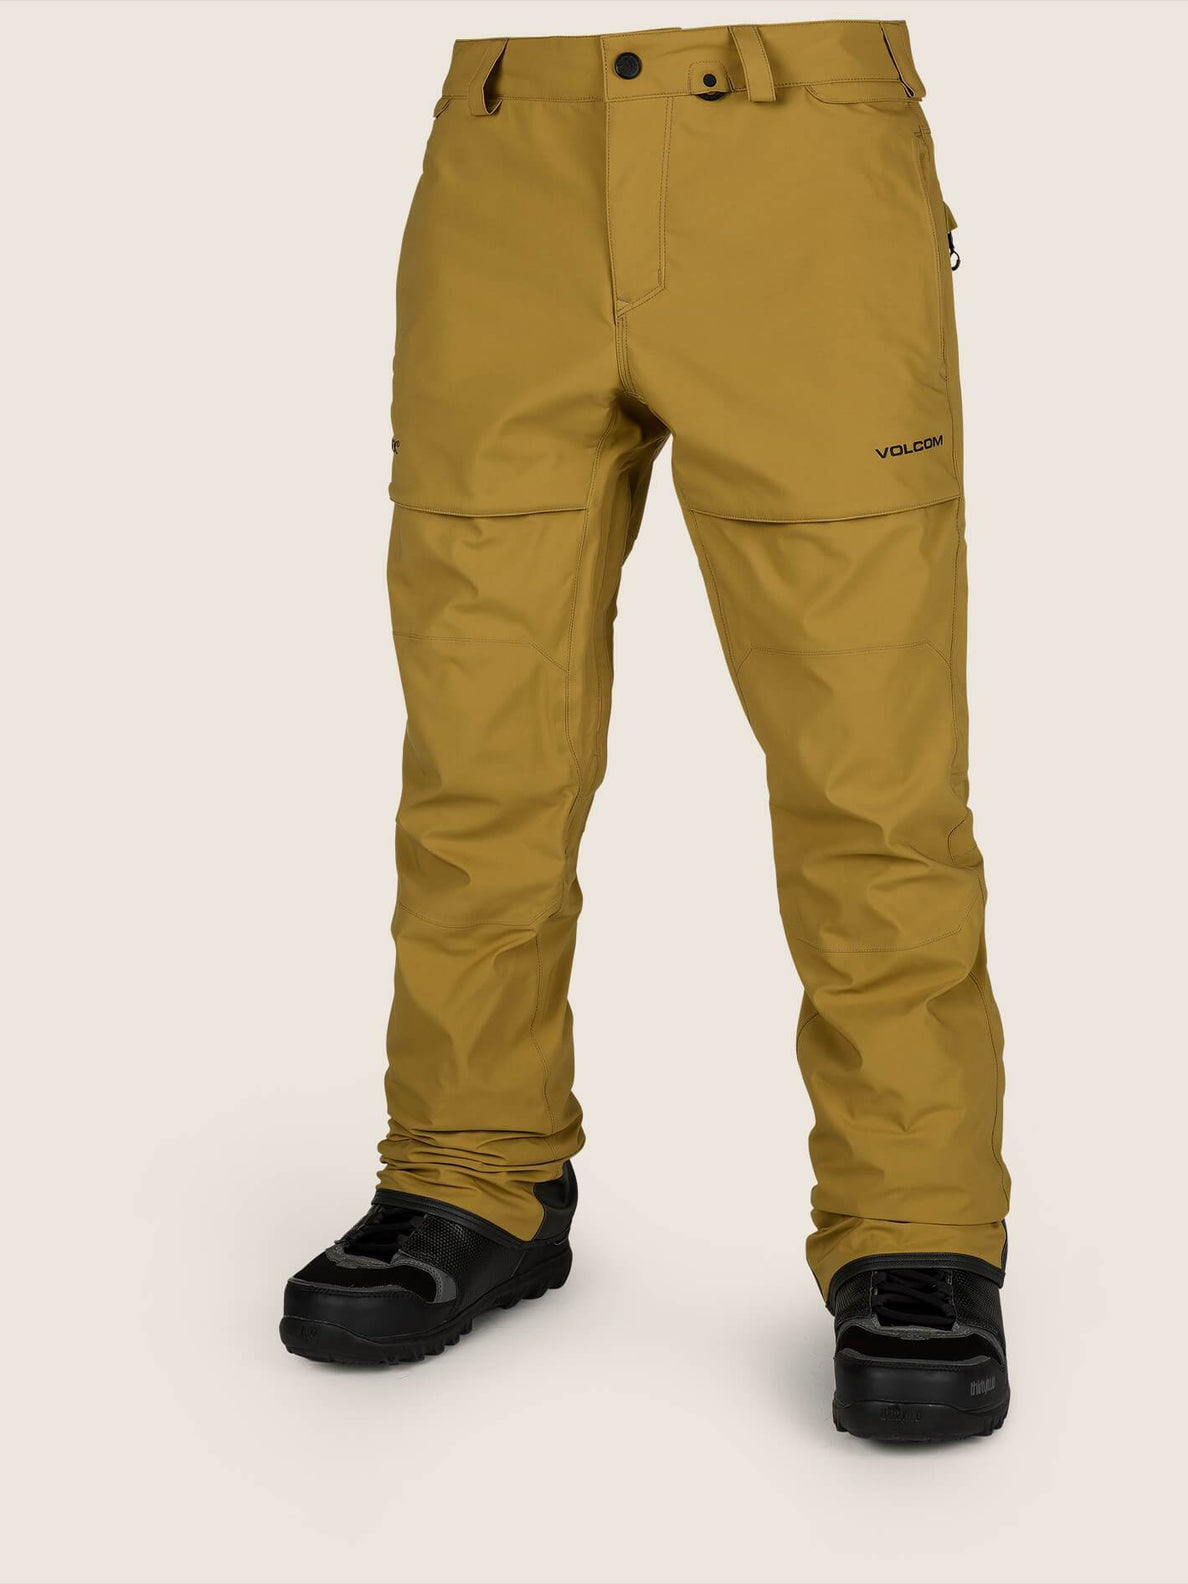 Stretch GORE-TEX Pants - Resin Gold